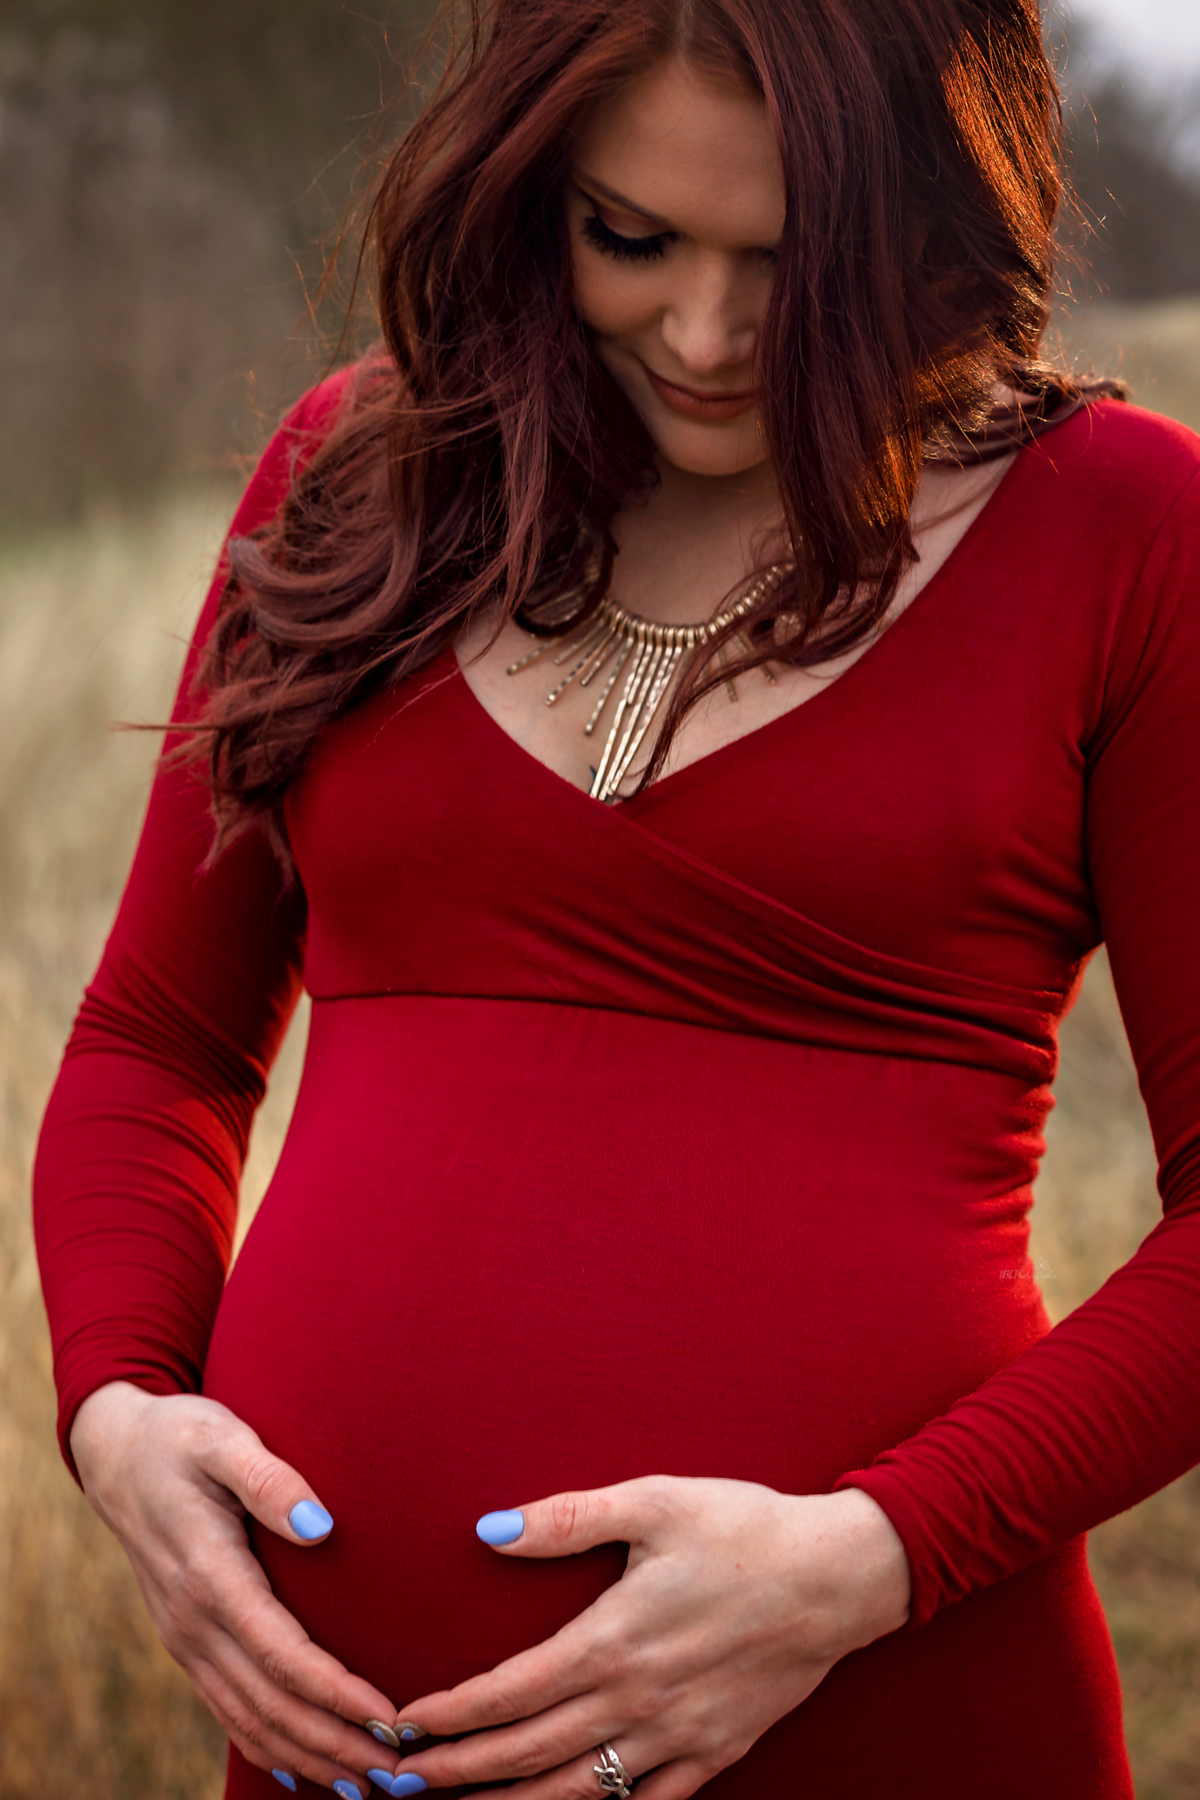 Embrace the fireside glow in a stylish winter maternity session near San Antonio. Our mom-to-be dons a scarlet flying dress, adding warmth and style to your family memories.